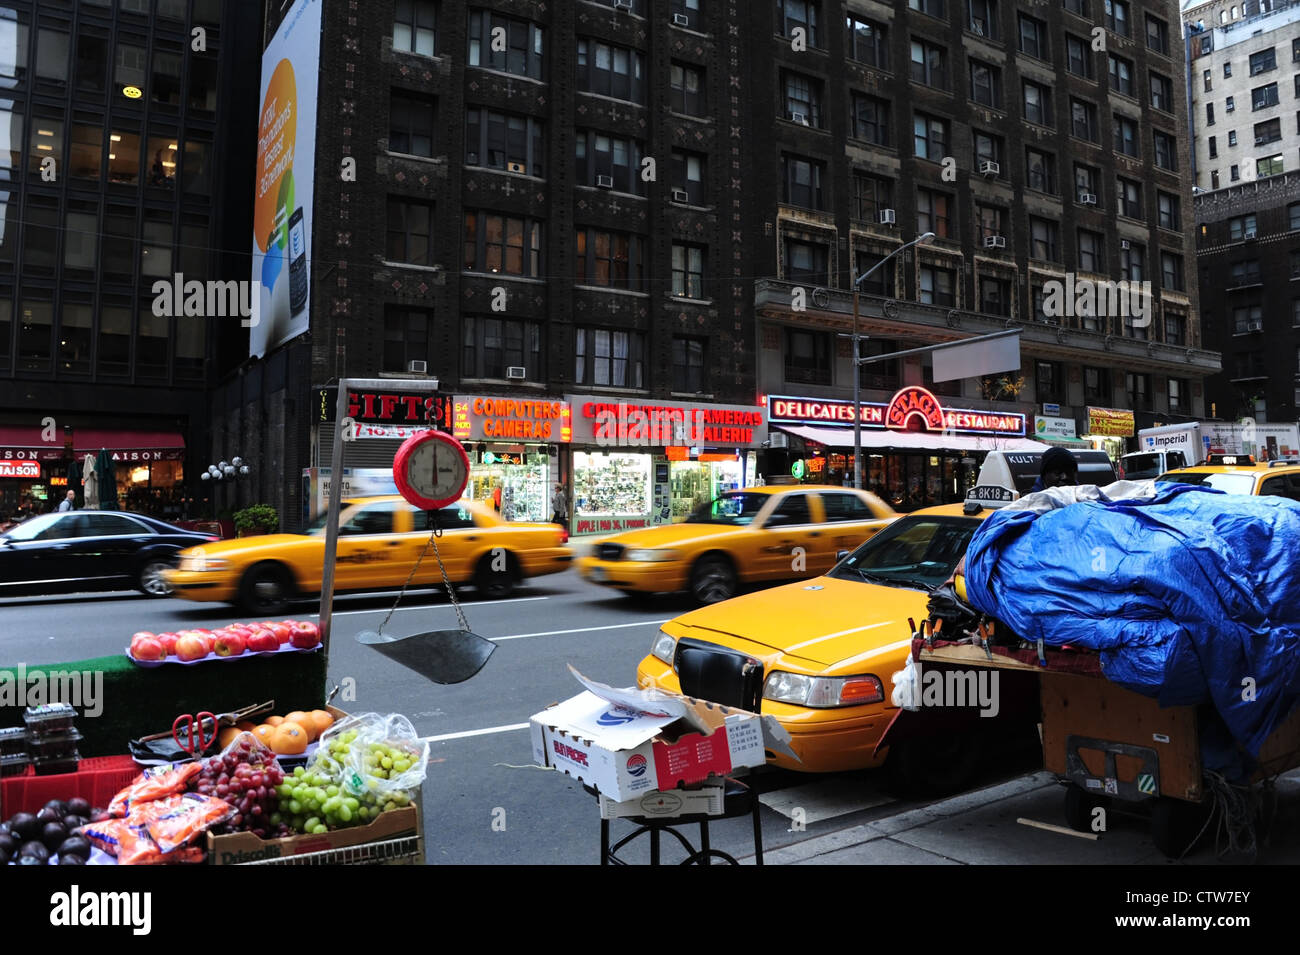 Morning view, towards red neon Stage Restaurant, sidewalk fruit stall, motion-blur yellow taxis, 7th Avenue, New York Stock Photo